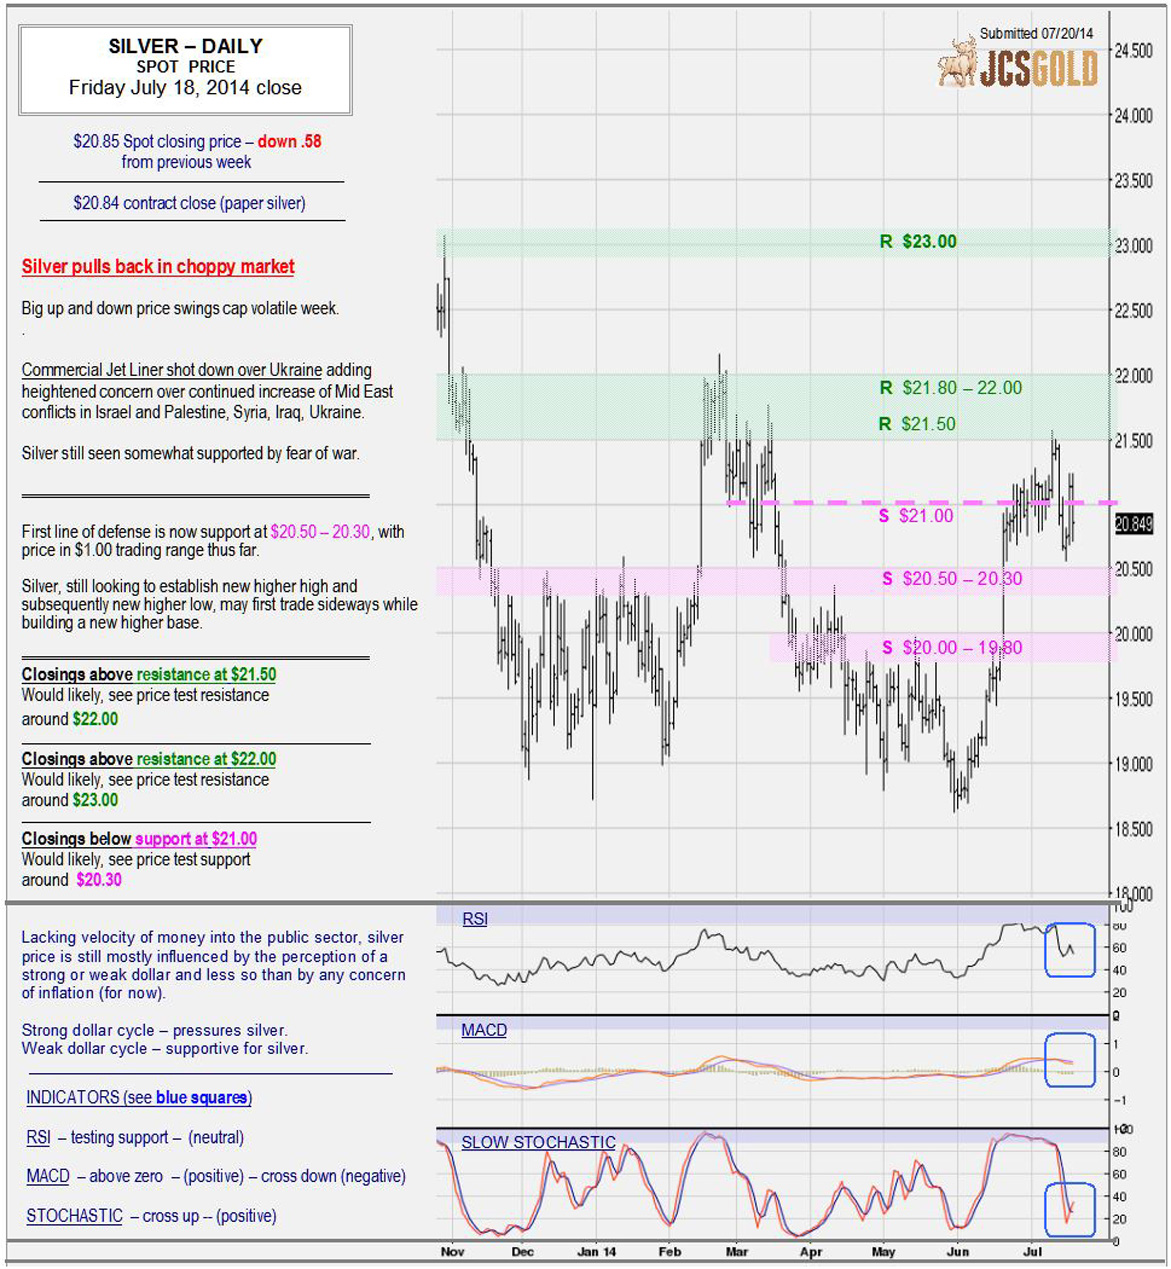 July 18, 2014 chart & commentary